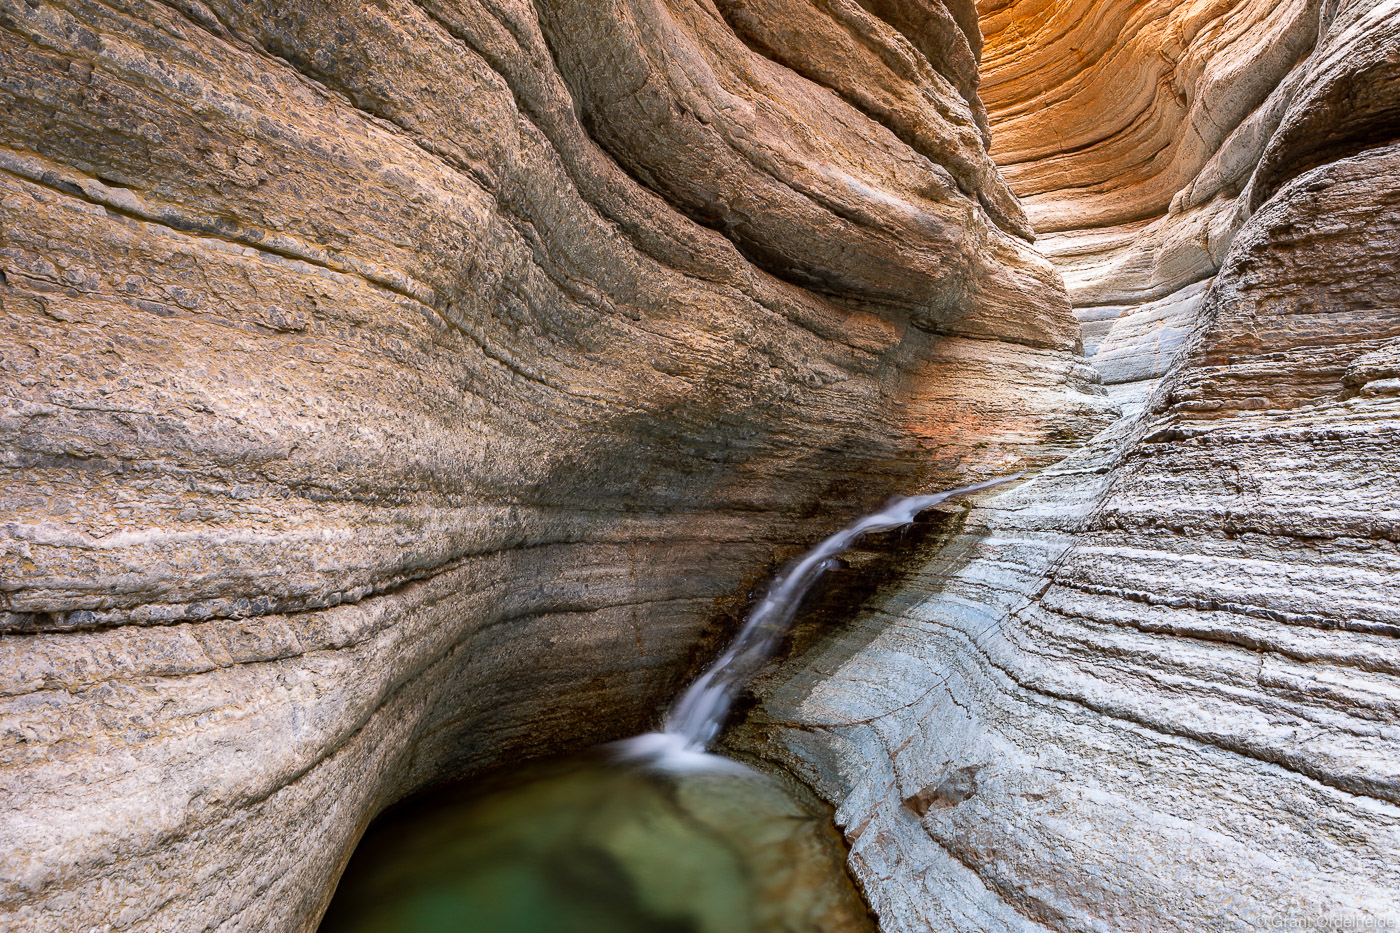 A small waterfall in Matkatamiba Canyon, a small side canyon of the Grand Canyon.